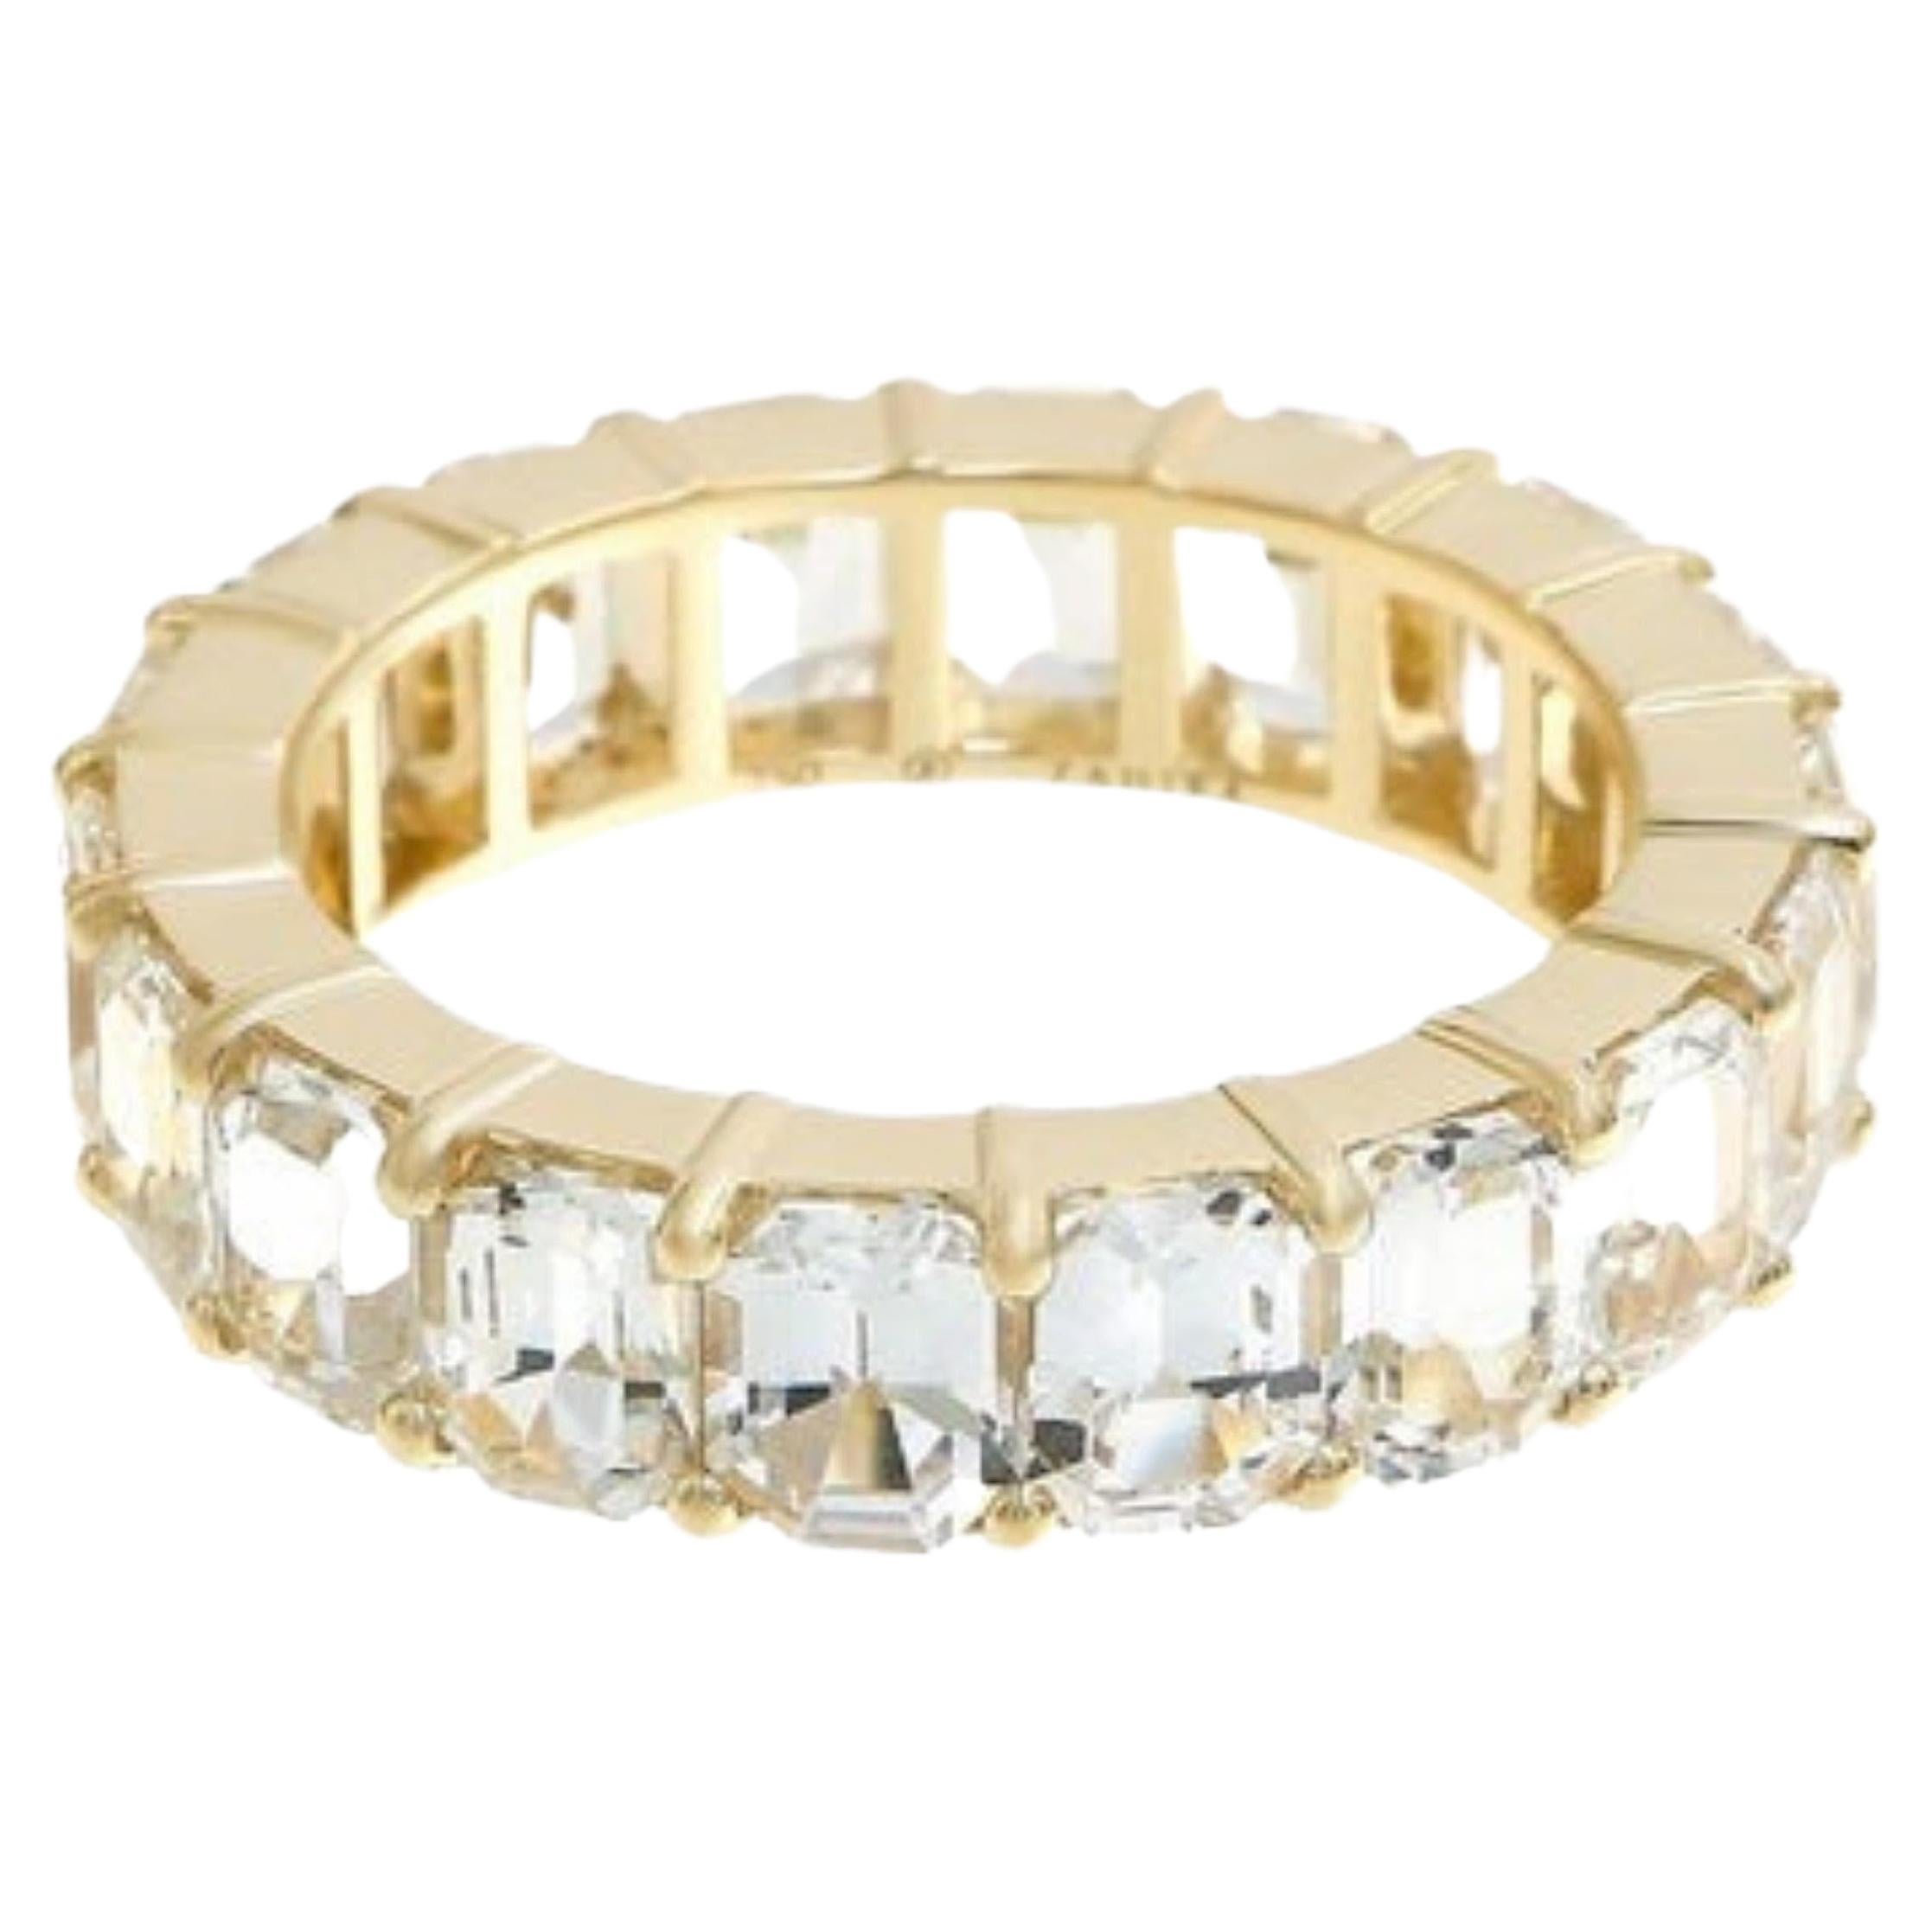 For Sale:  10.96 Carat Emerald Cut White Sapphire Eternity Band in 18 Karat Yellow Gold